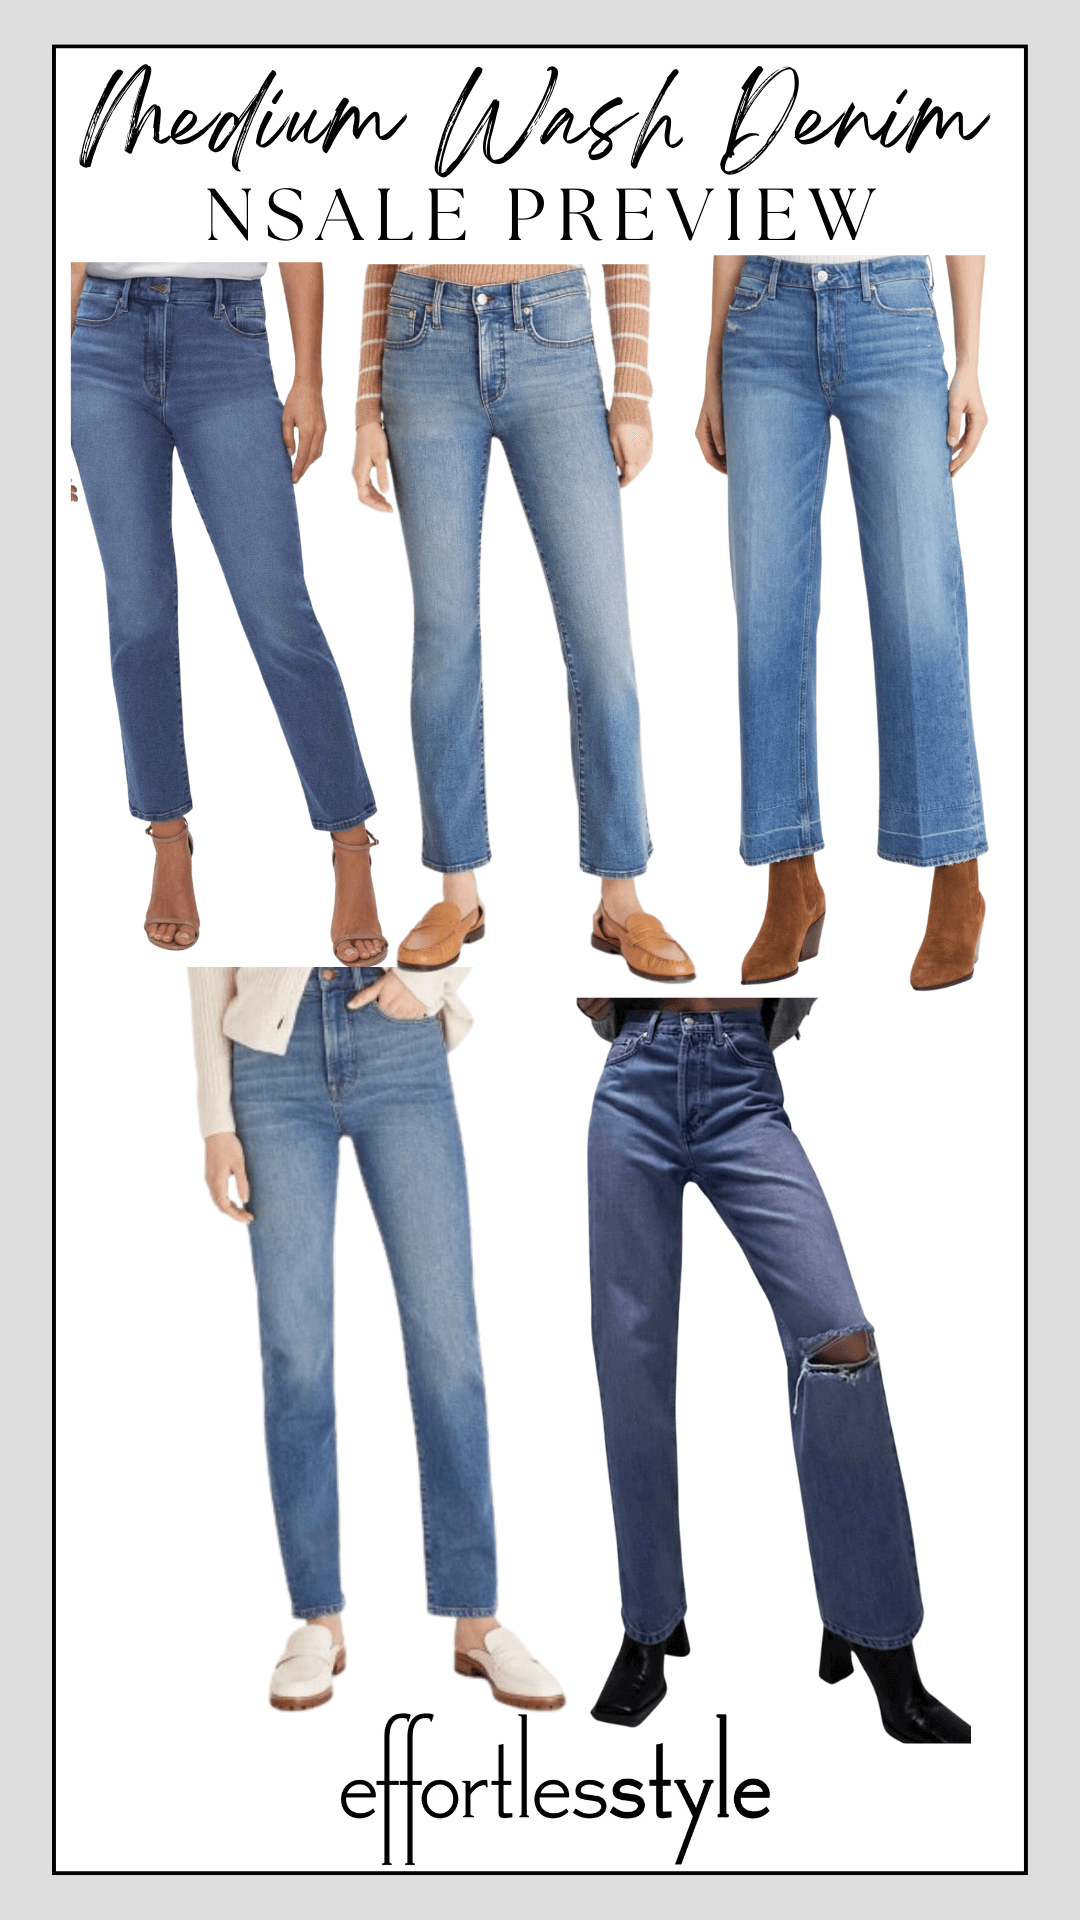 2023 NSale Preview - Denim Edition Medium Wash Denim how to shop for jeans in the NSale how to buy jeans at the Nordstrom Sale the best jeans in the NSale personal stylists share favorite medium wash jeans for fall early fall style inspiration must have jeans for fall 